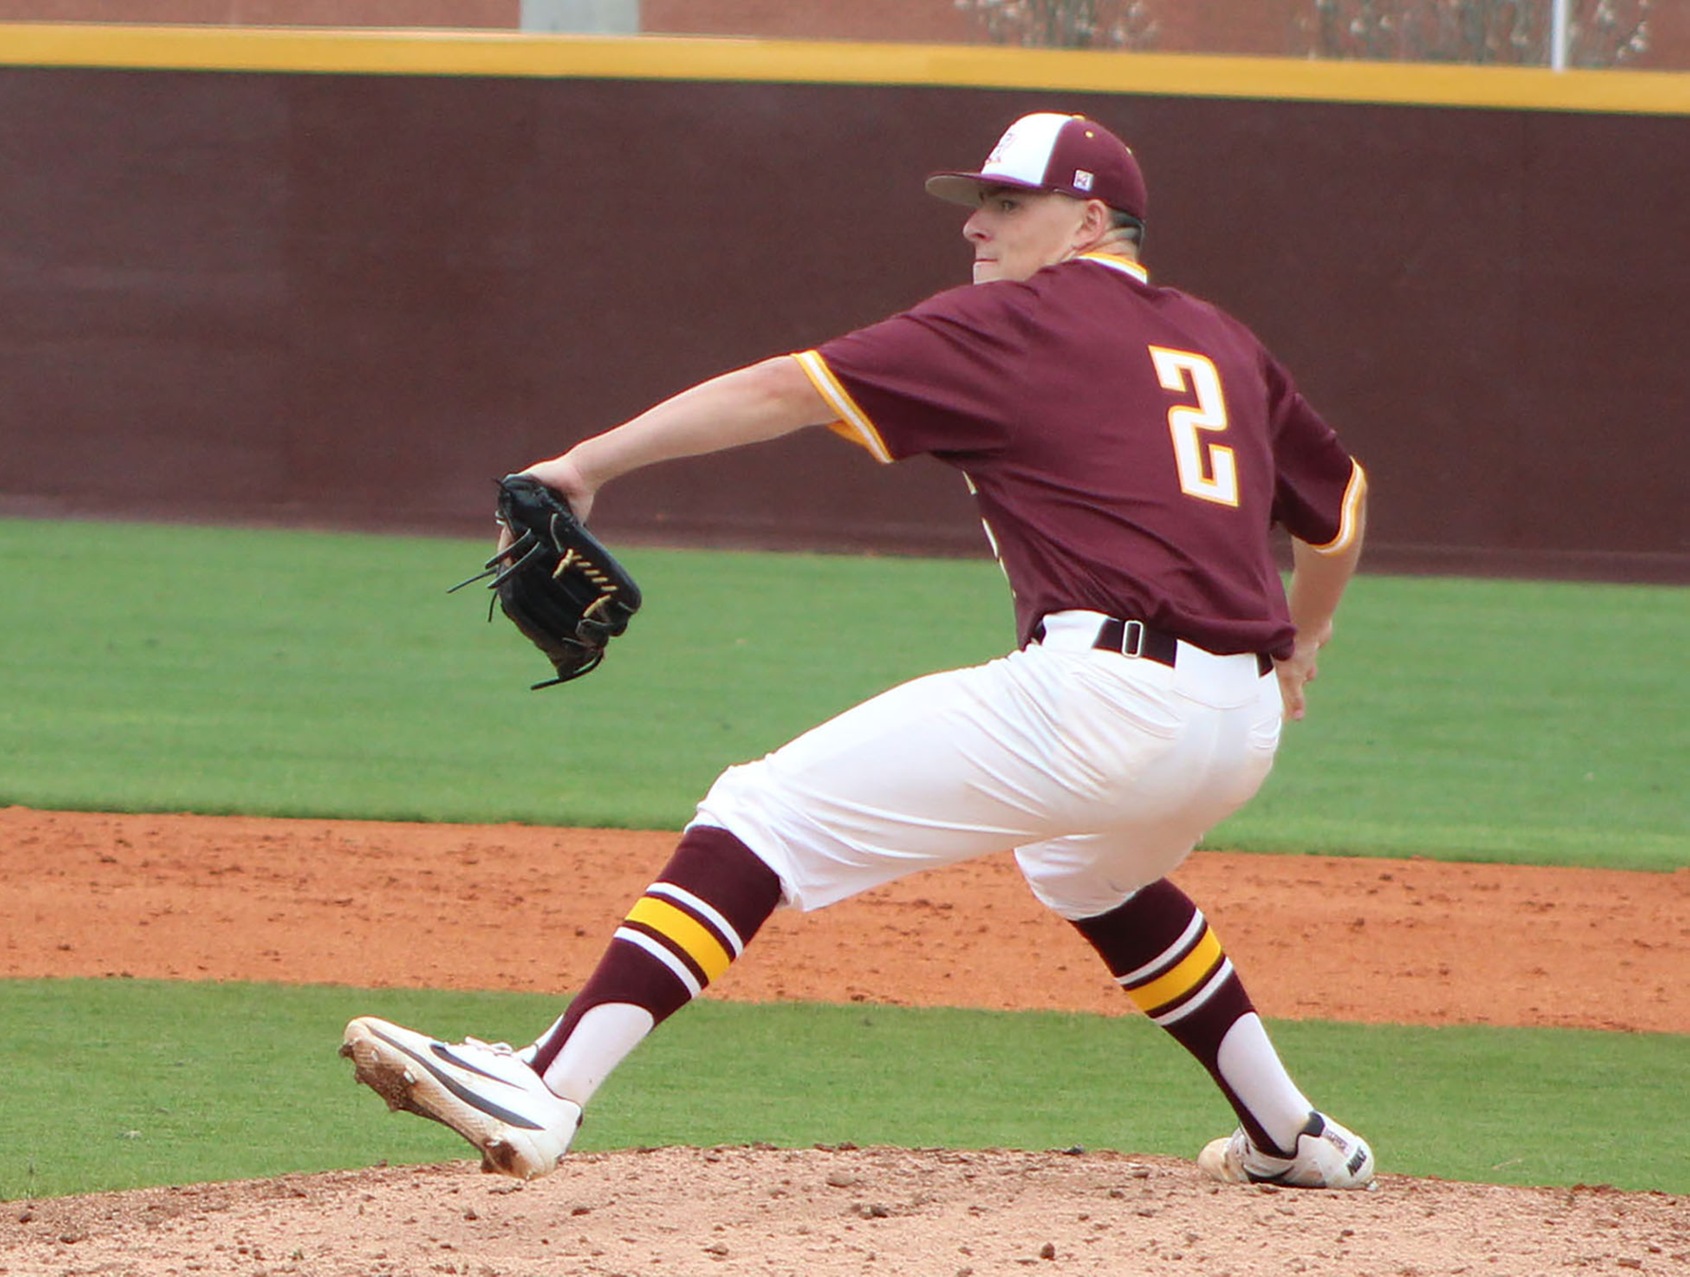 Right-hander Miles Smith is expected to be one of the leaders on the Pearl River baseball team in 2019. The Wildcats recently opened fall practice. (PRCC ATHLETICS)